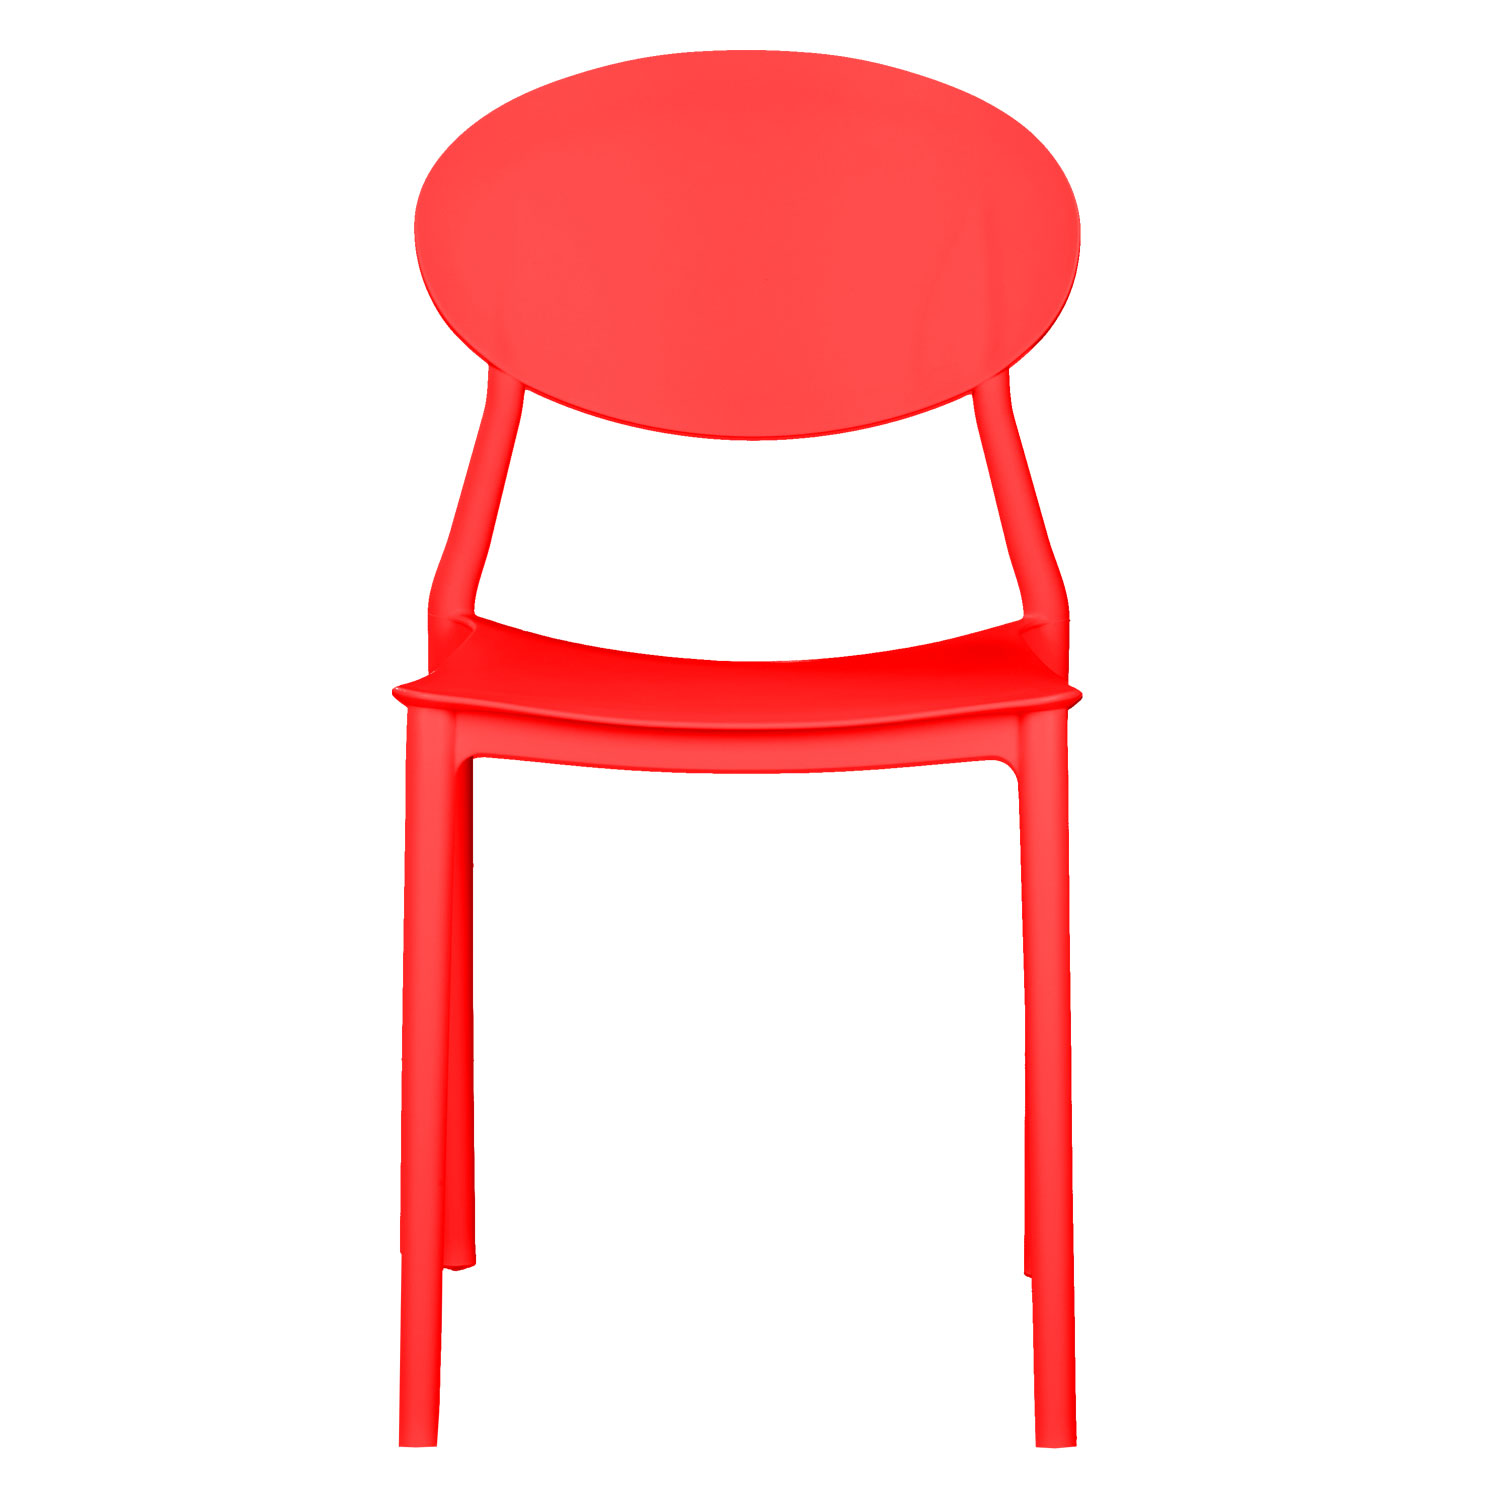 Garden chair Set of 4 Camping chairs Red Outdoor chairs Plastic Stacking chairs Kitchen chairs